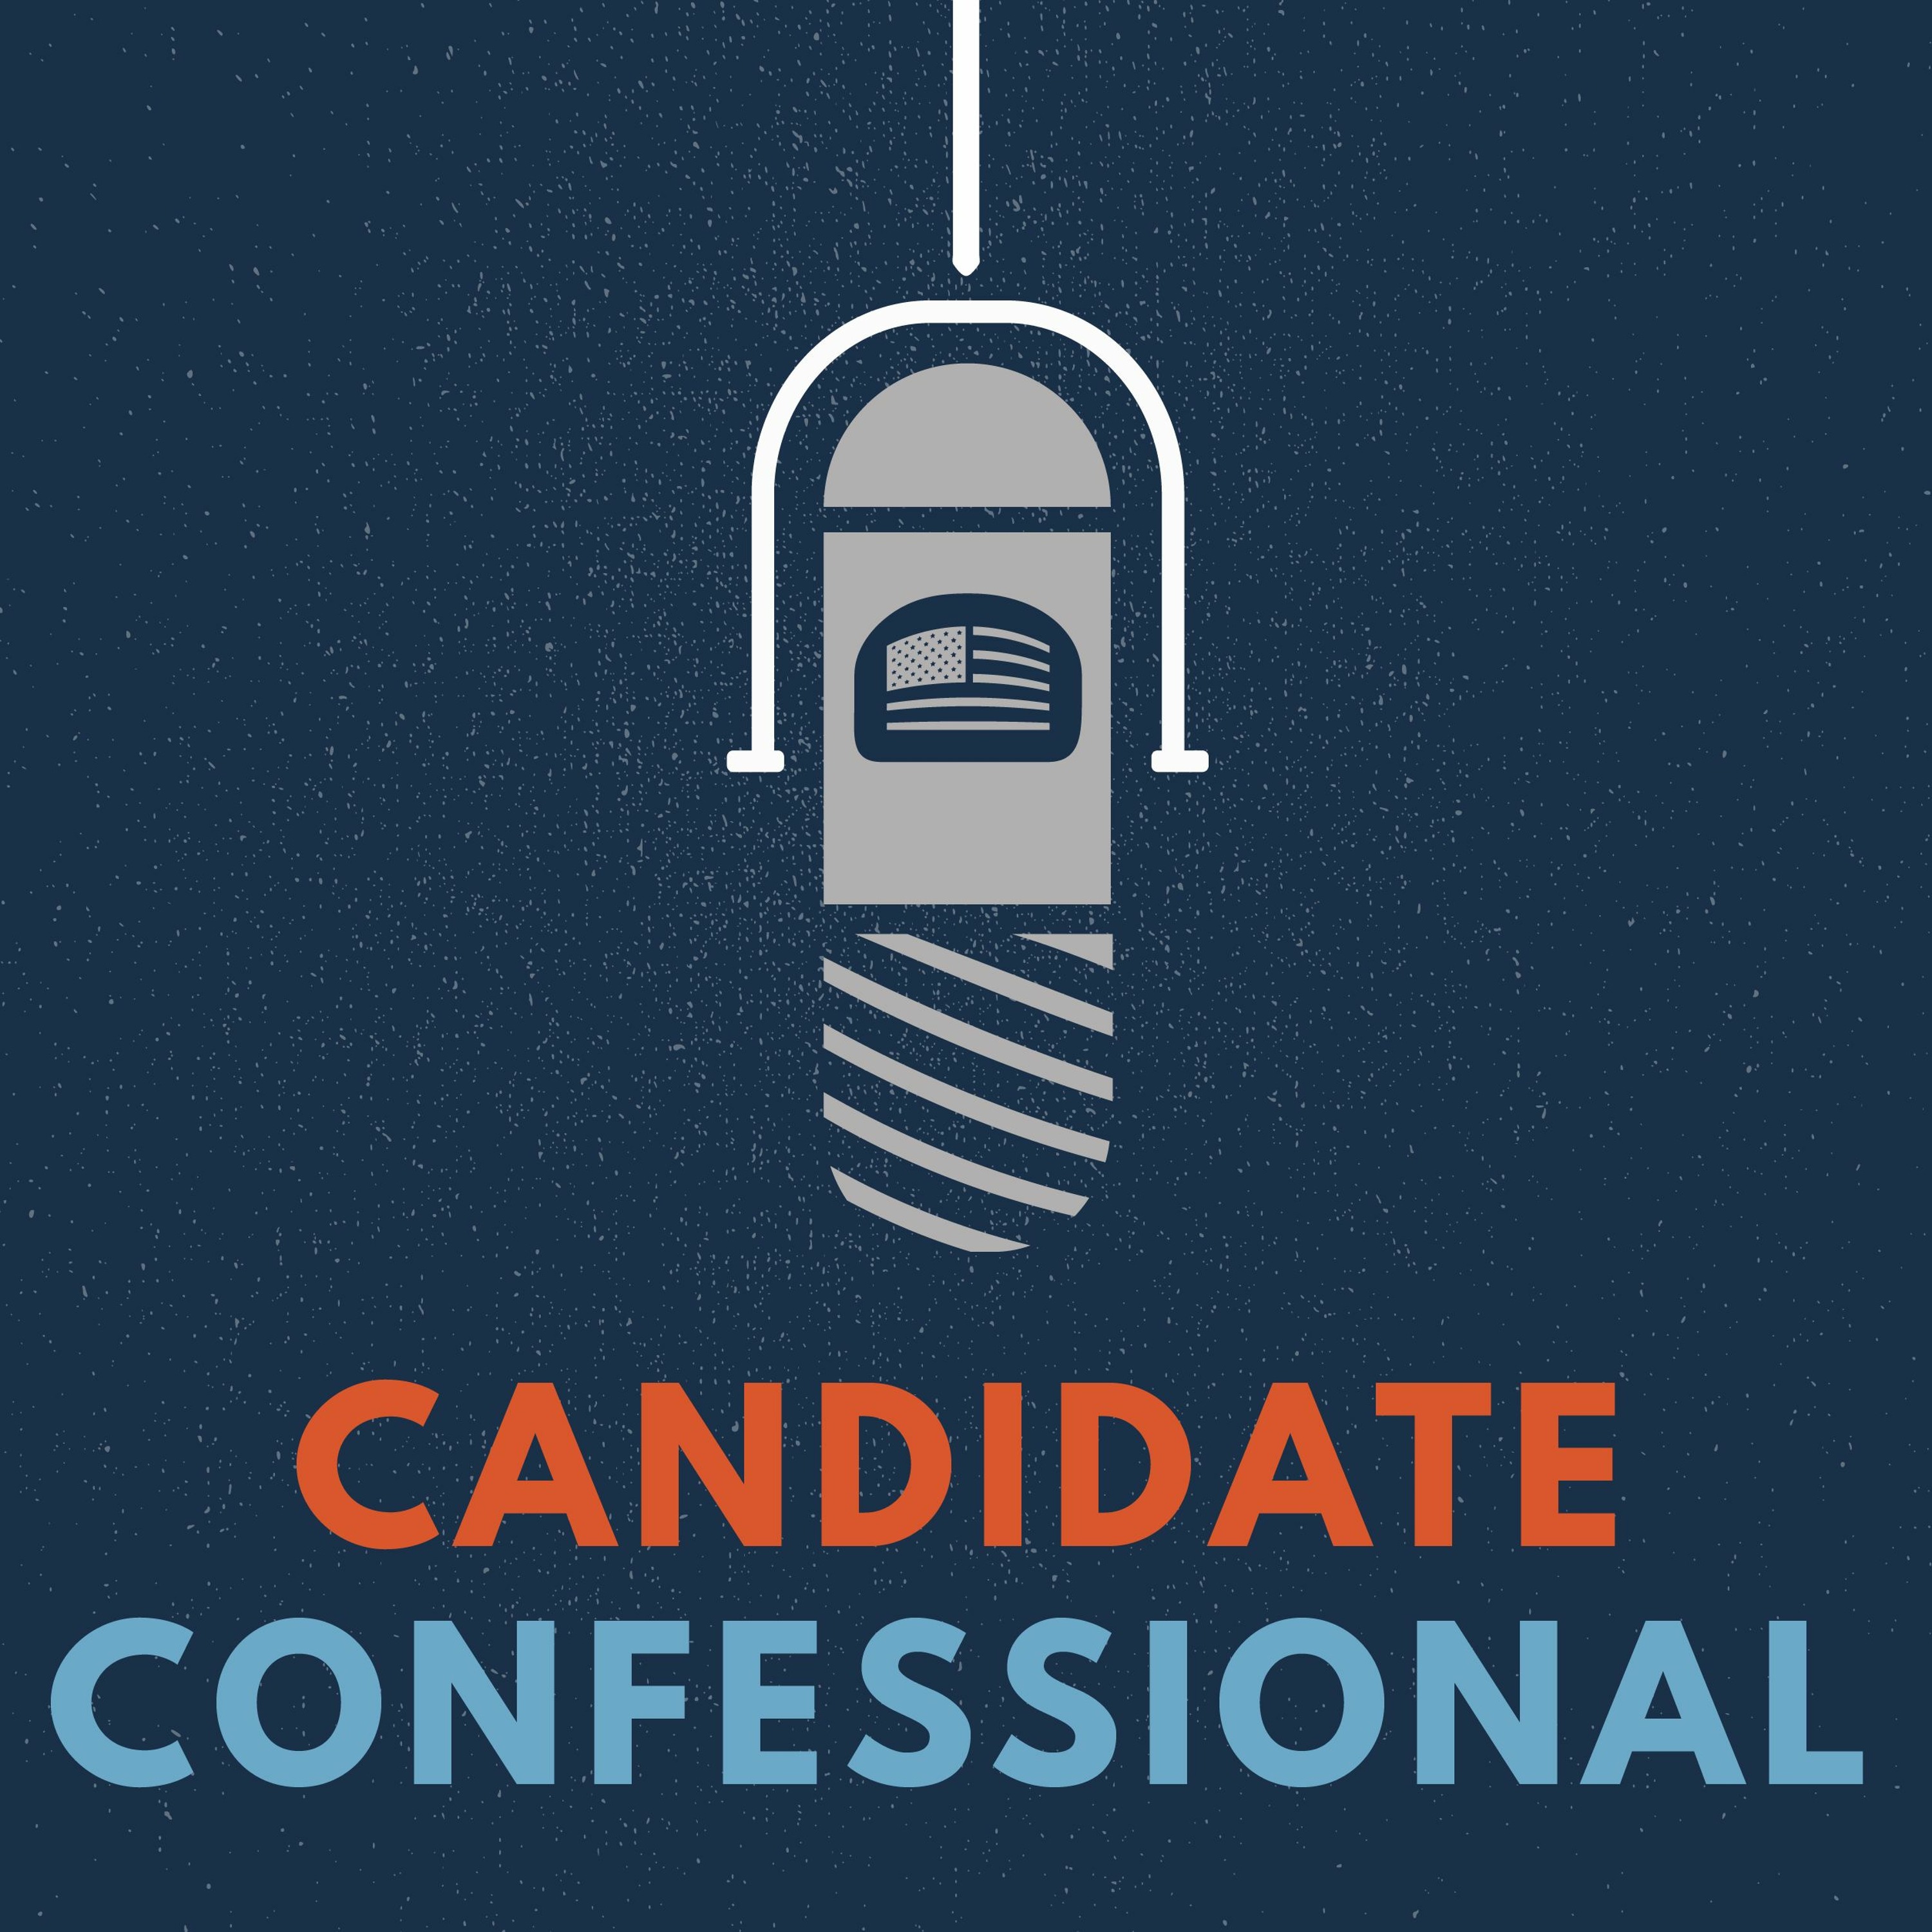 Welcome To Candidate Confessional